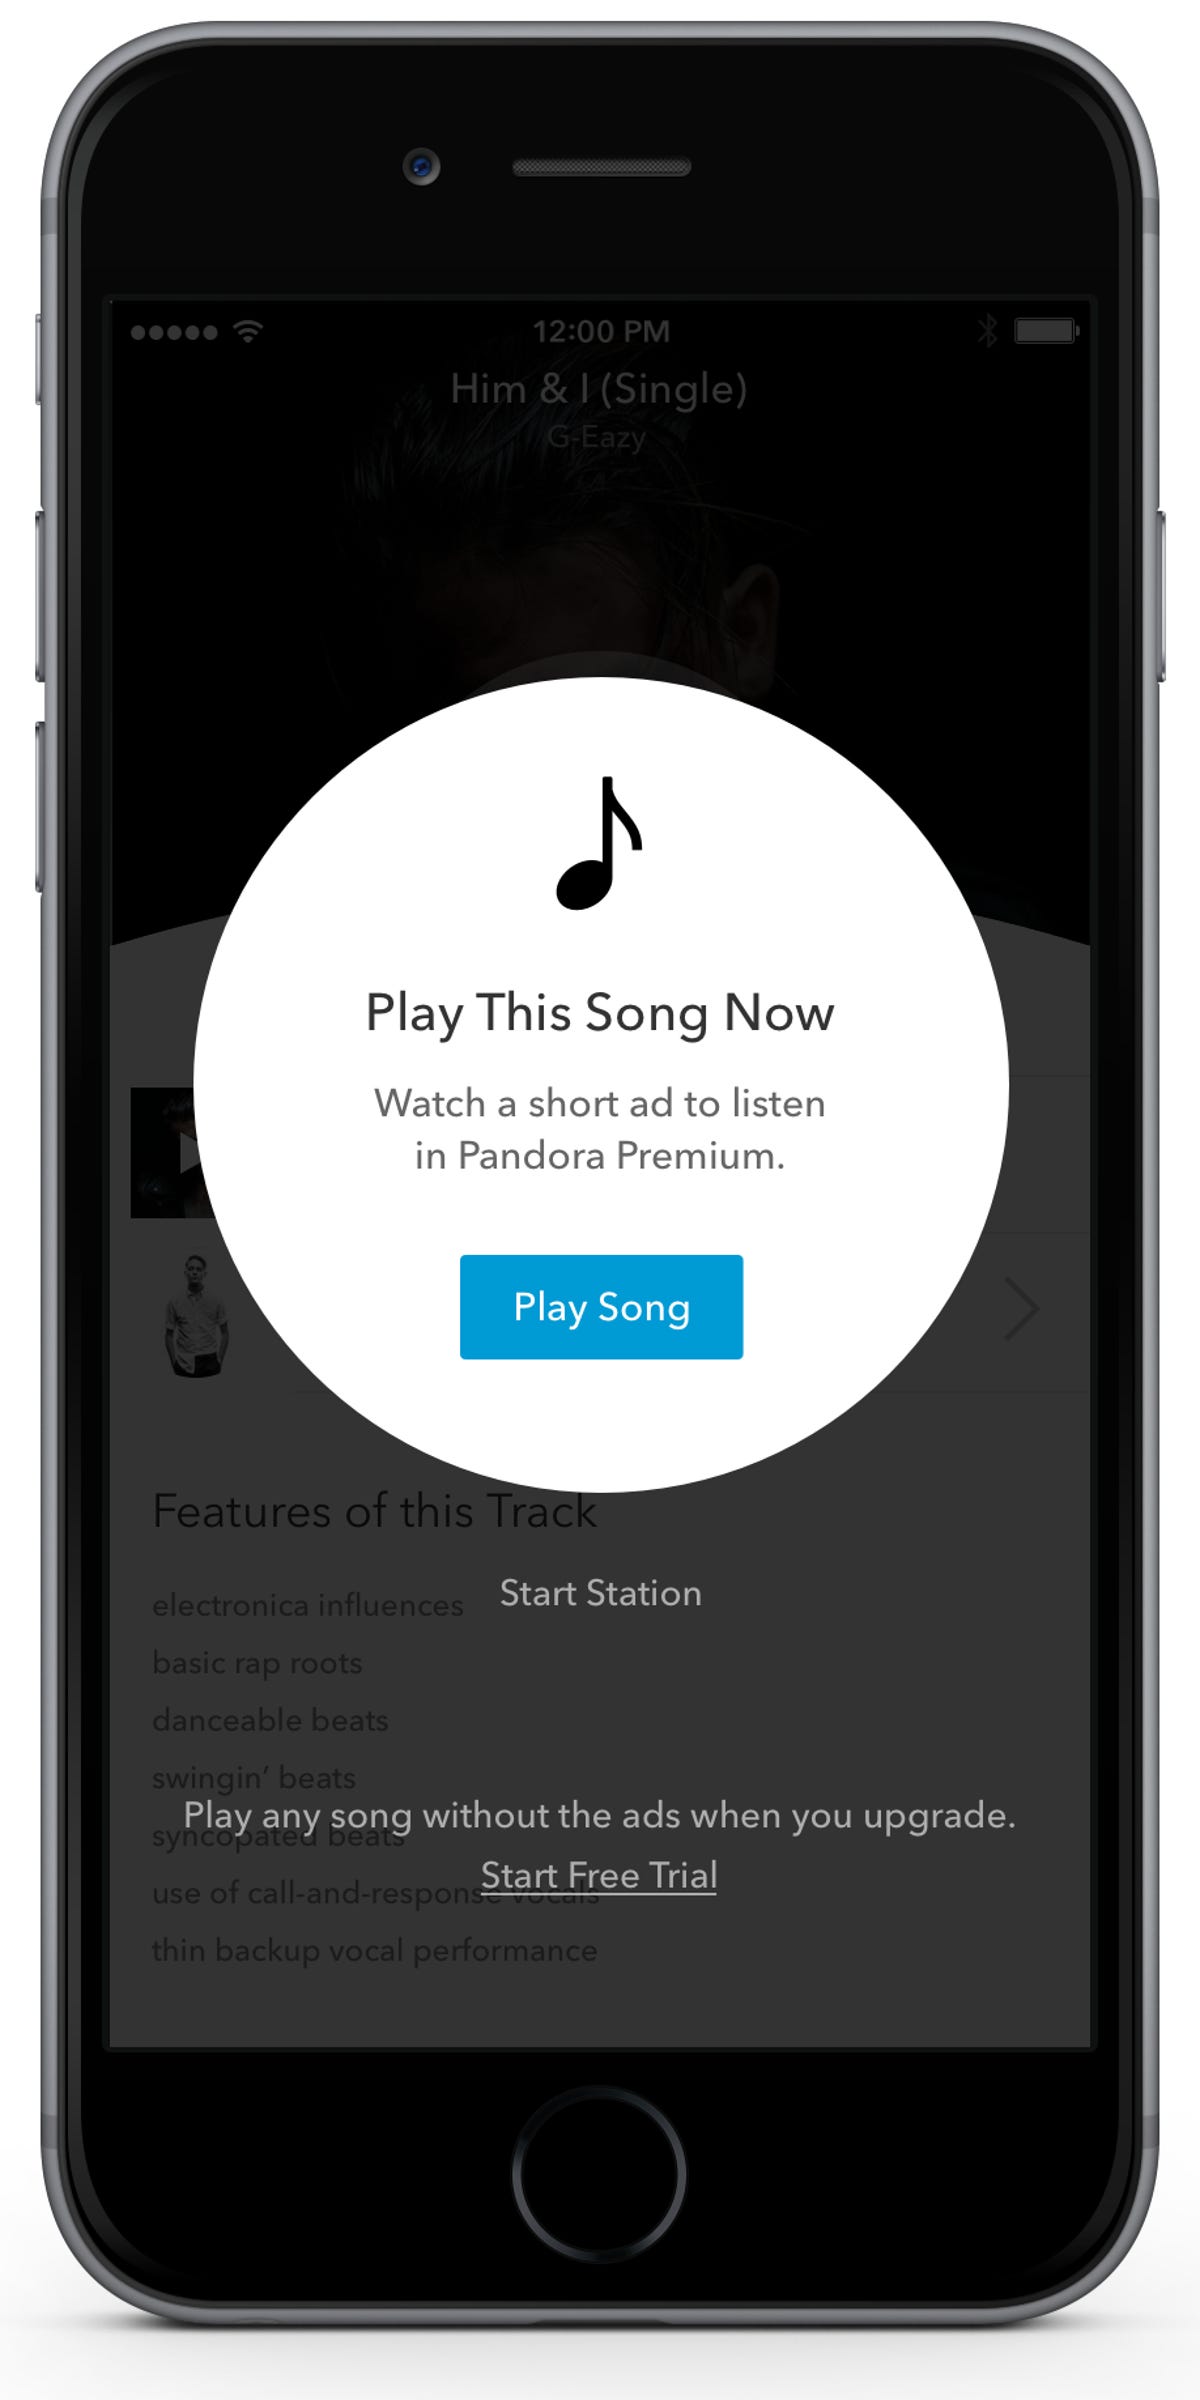 rib make worse Stop by to know Pandora lets free users play songs on-demand with a video ad - CNET